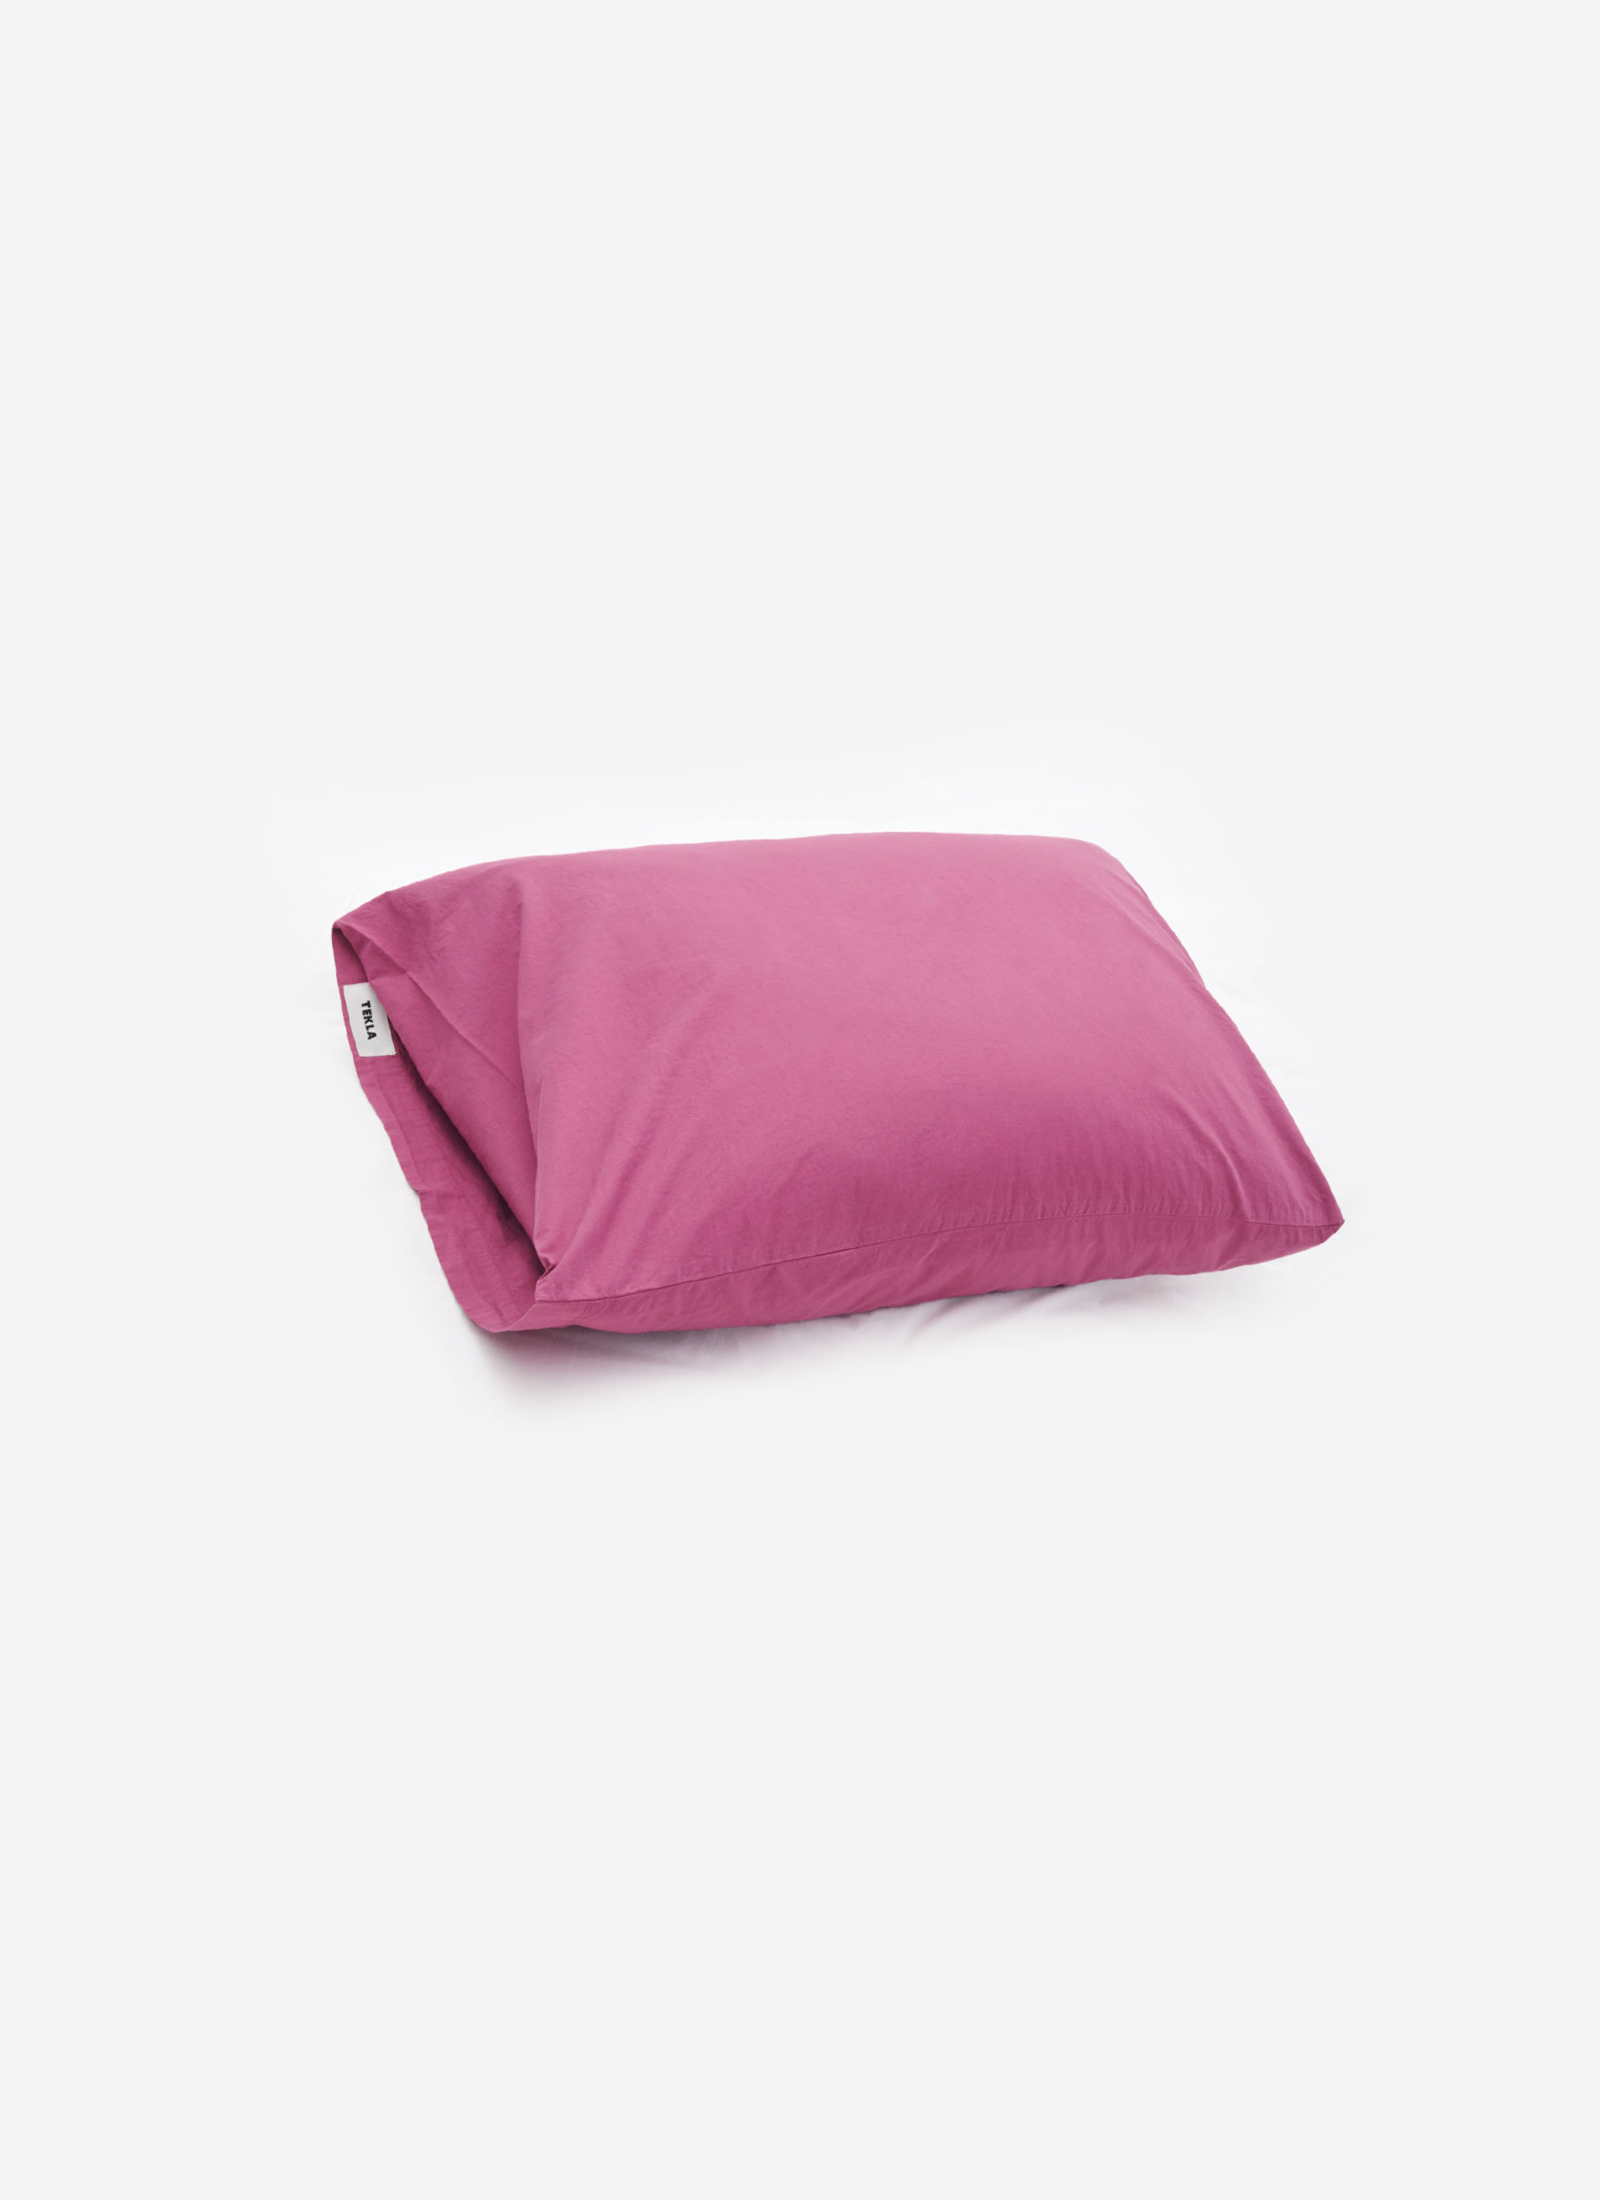 Pillowcases in Lingonberry - Pair